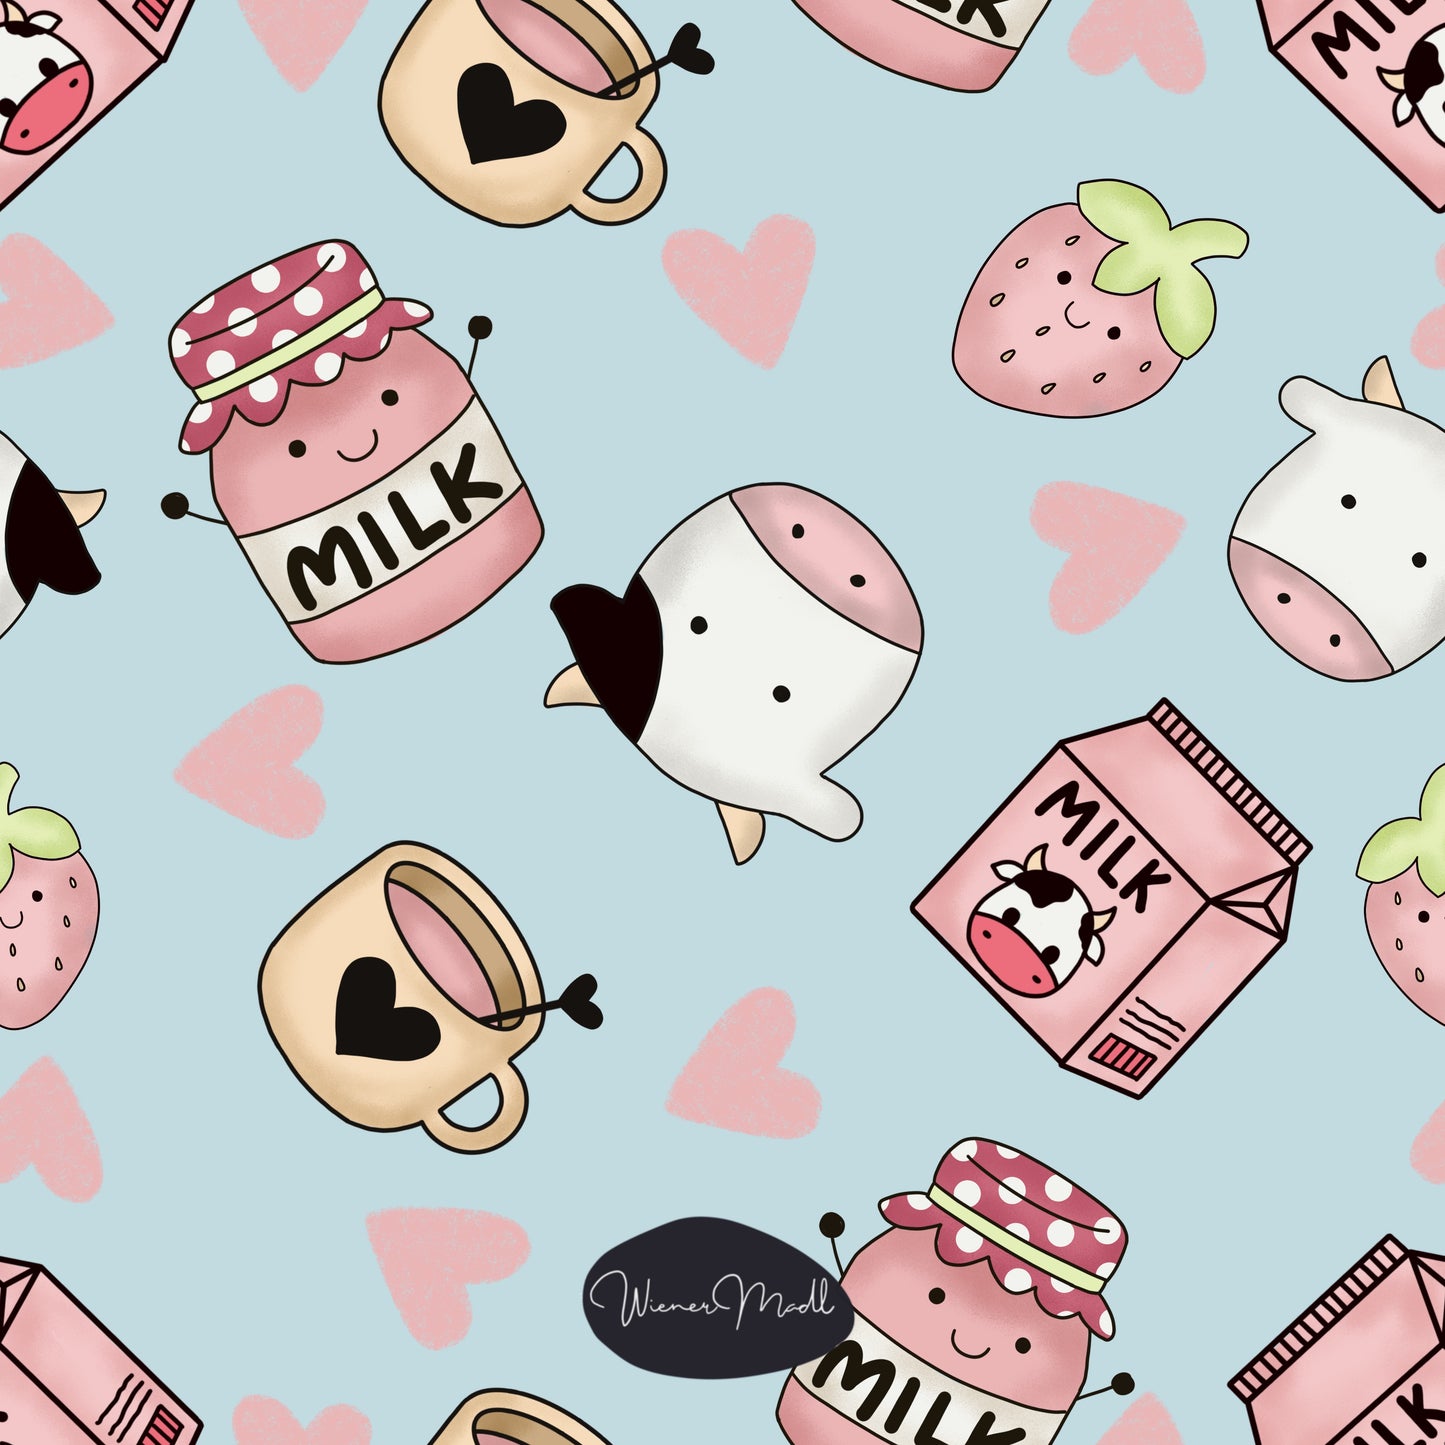 seamless repeat pattern -milk and cows kawaii- exclusiv pattern